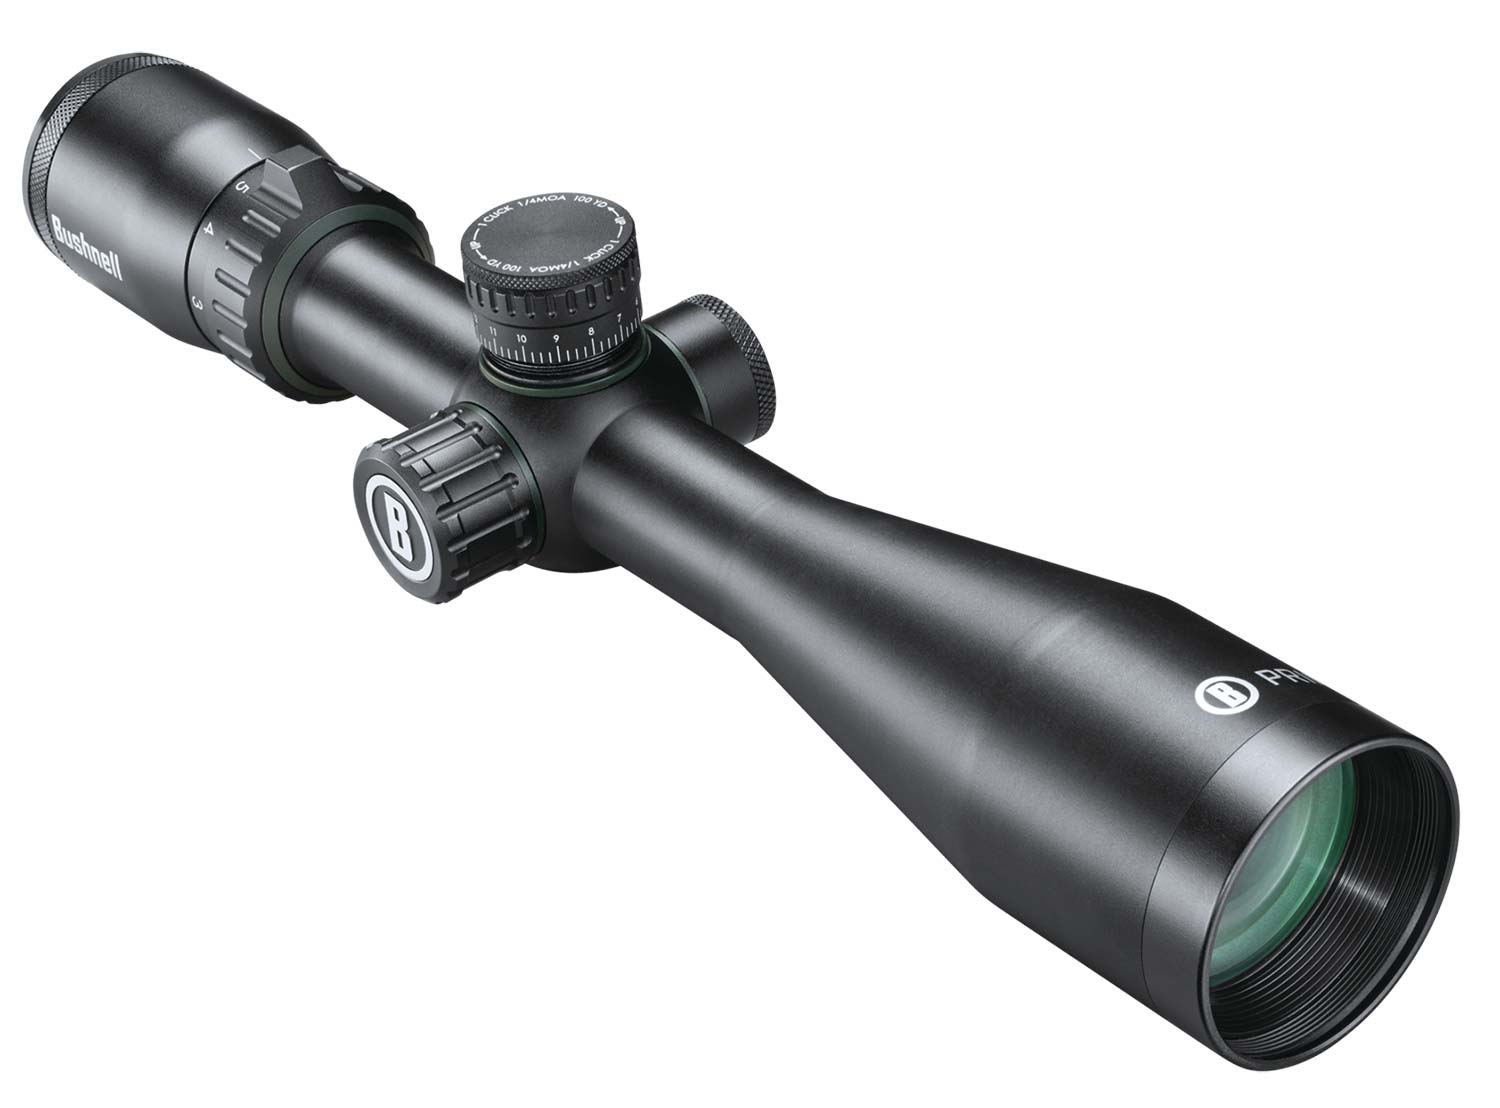 Bushnell Prime 3-12x40 riflescope on a white background.